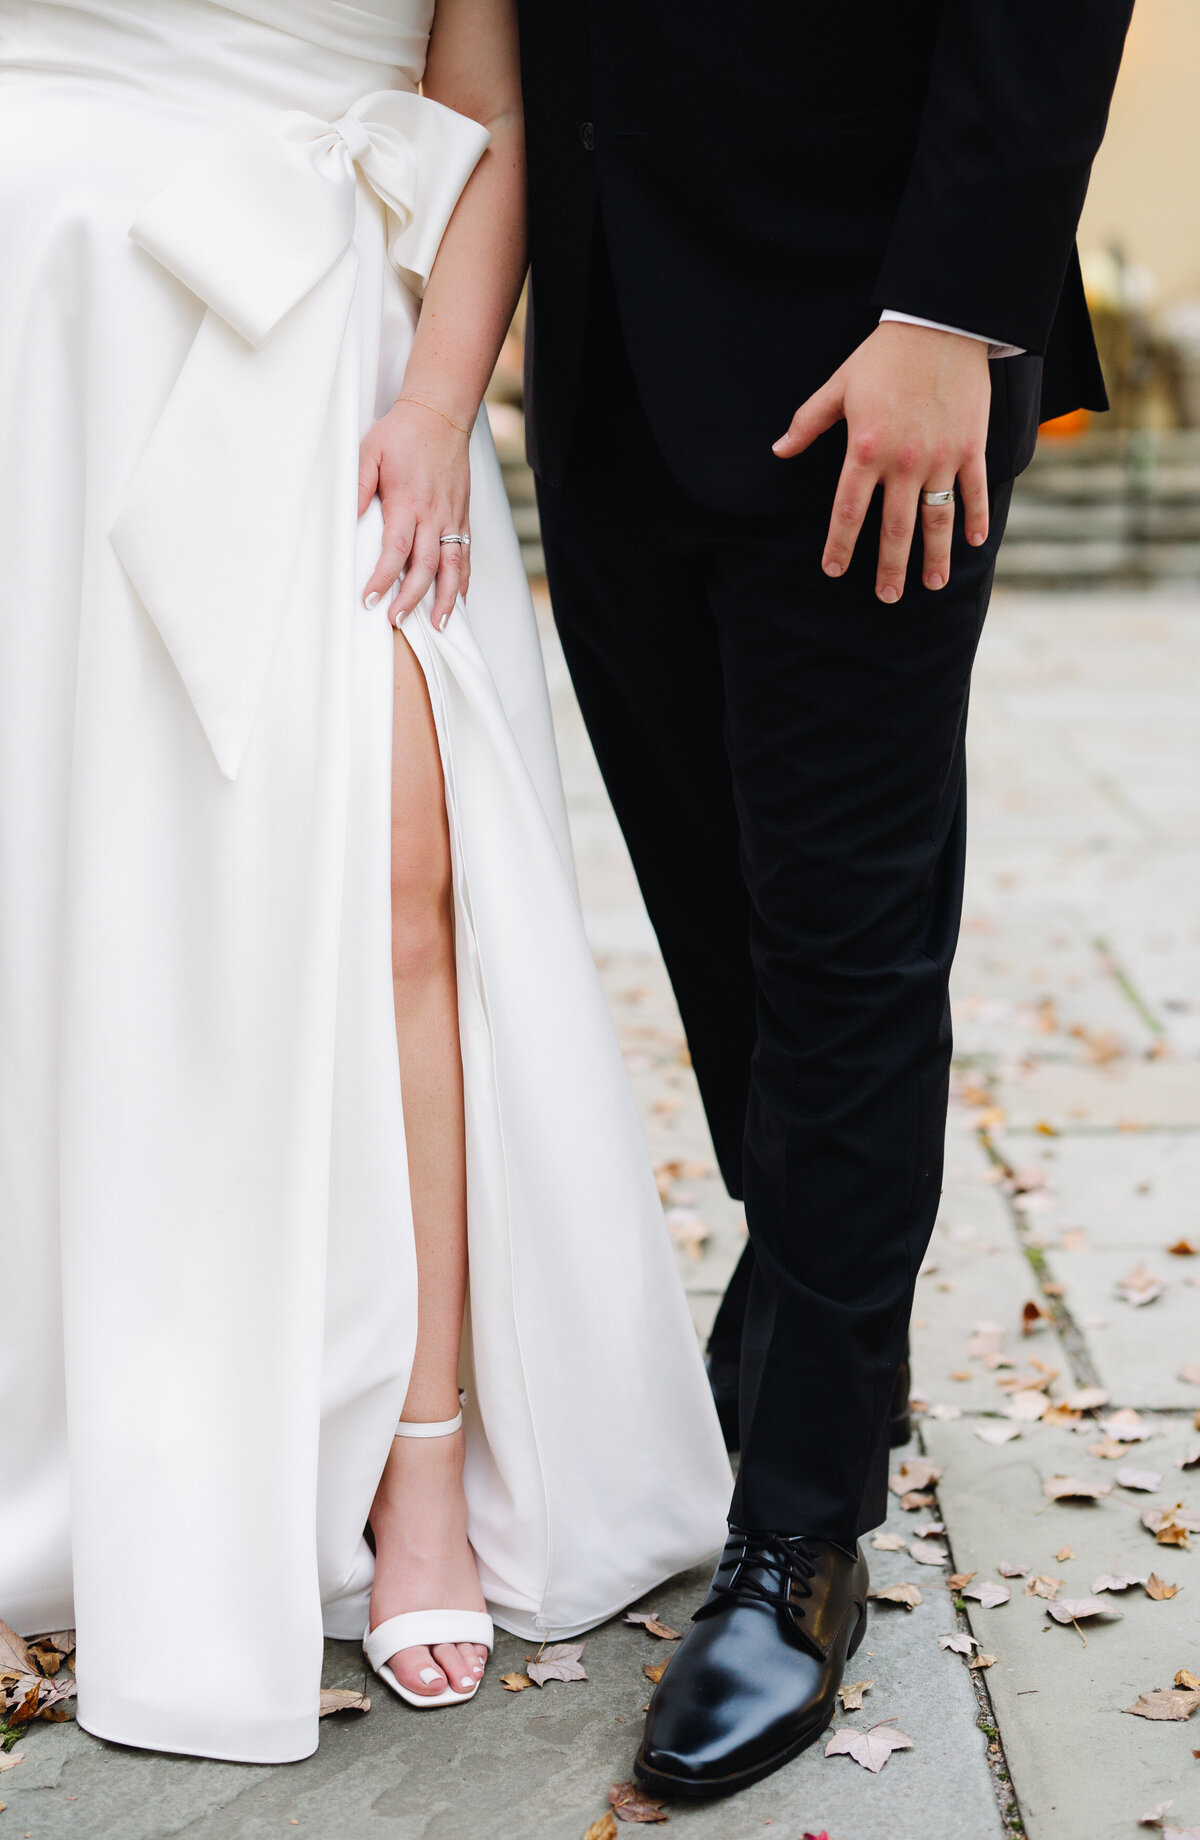 Virginia wedding photographer captures detail shot of bride and groom standing togethr and stowing off their wedding shoes